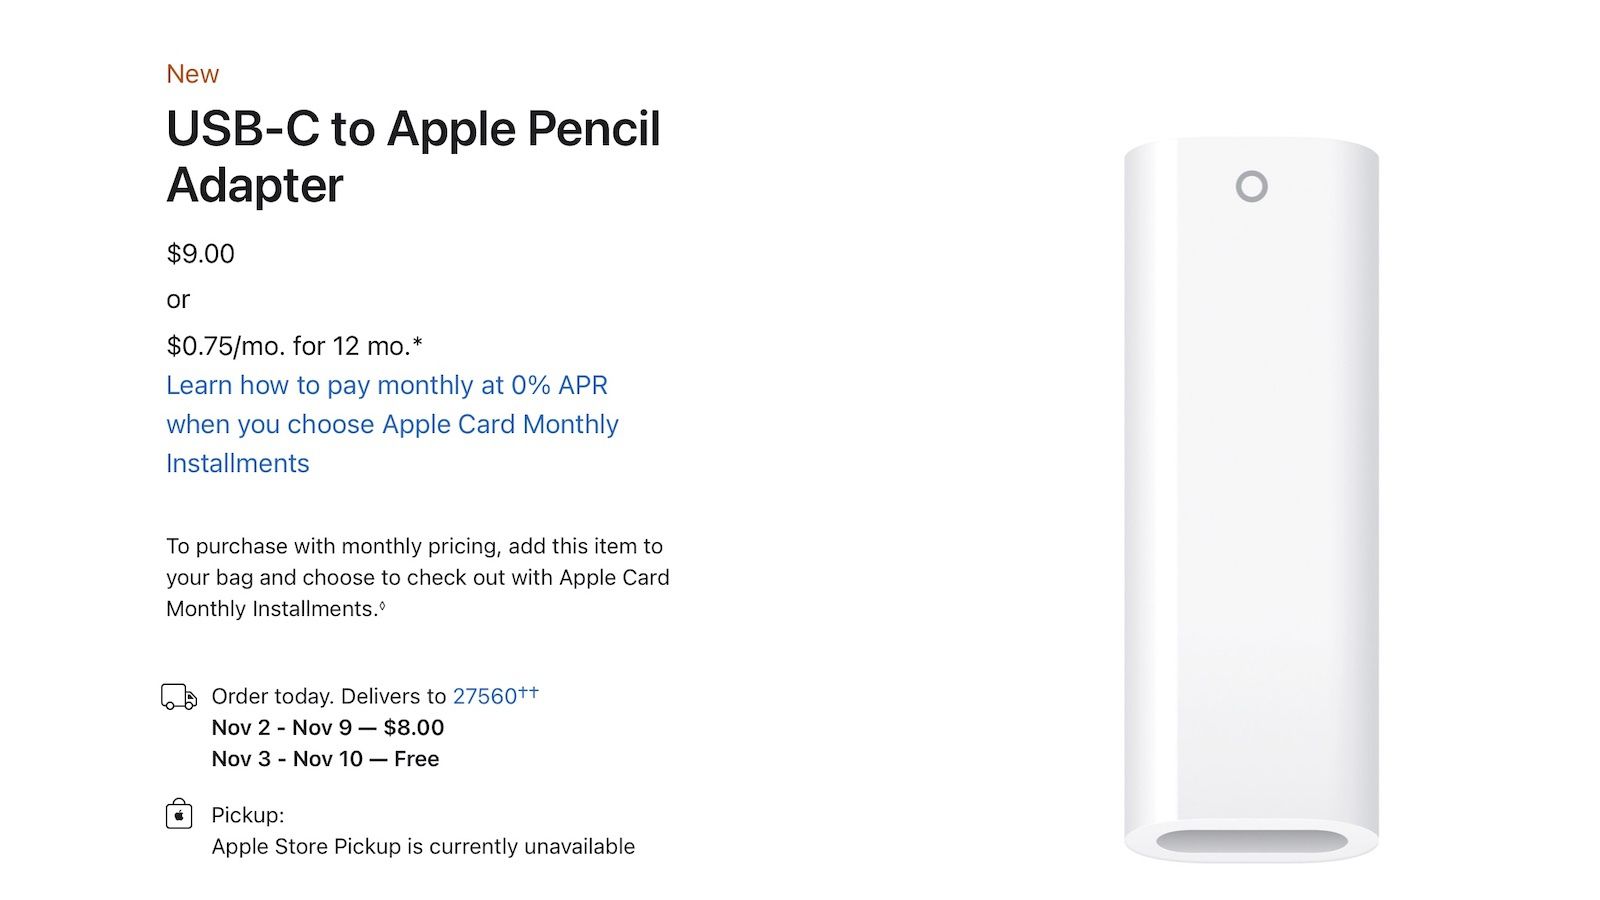 New iPad Only Supports First-Gen Apple Pencil, Requires Adapter to